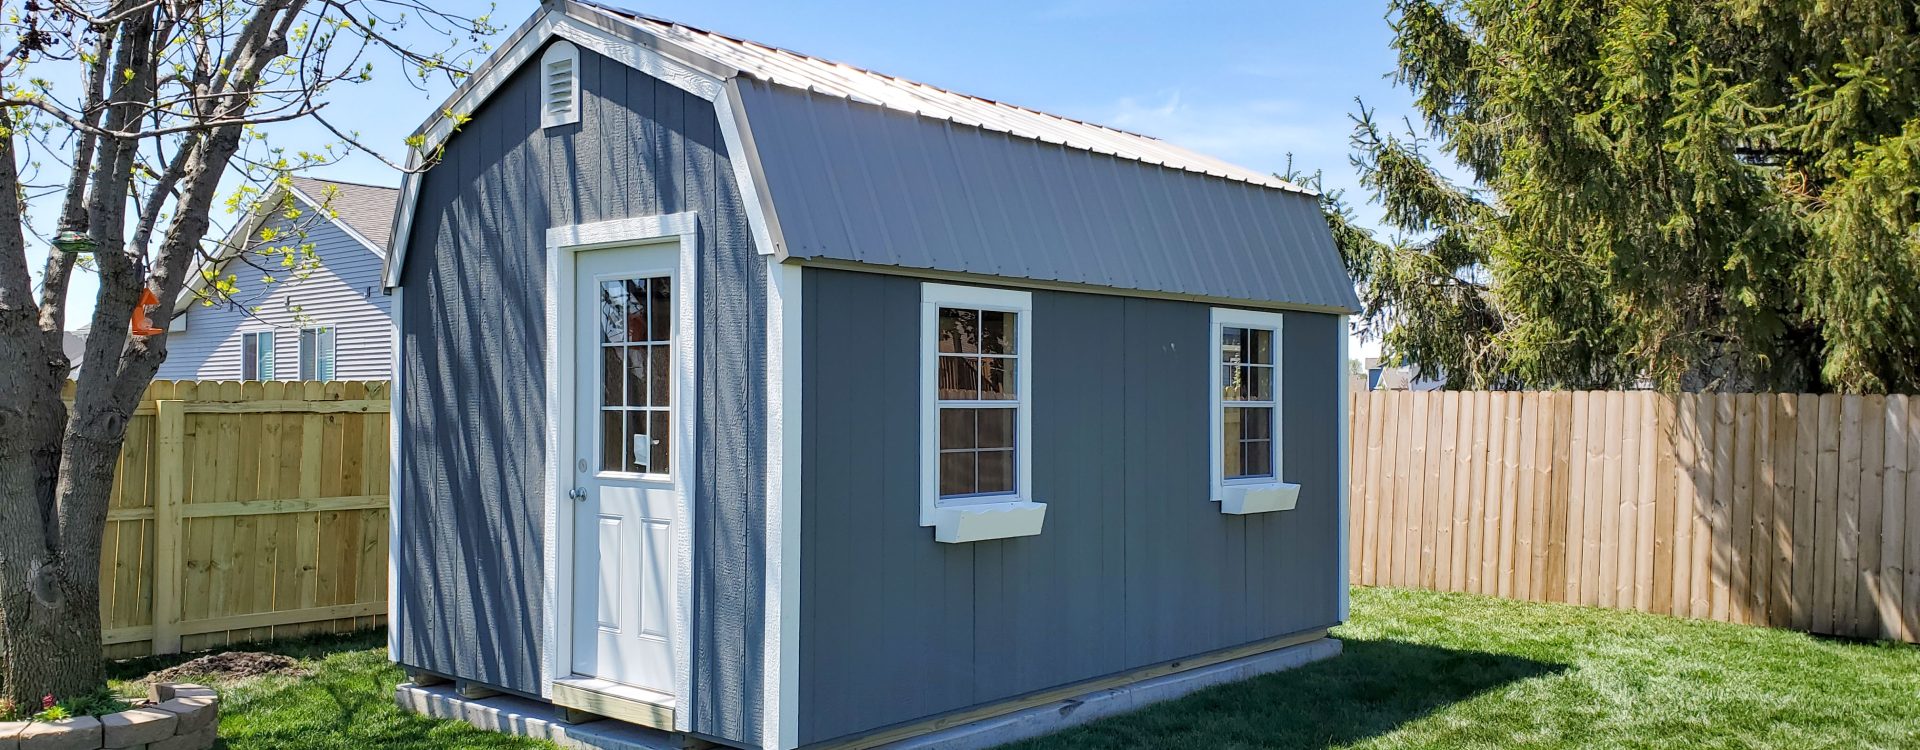 storage sheds for sale in centerville iowa